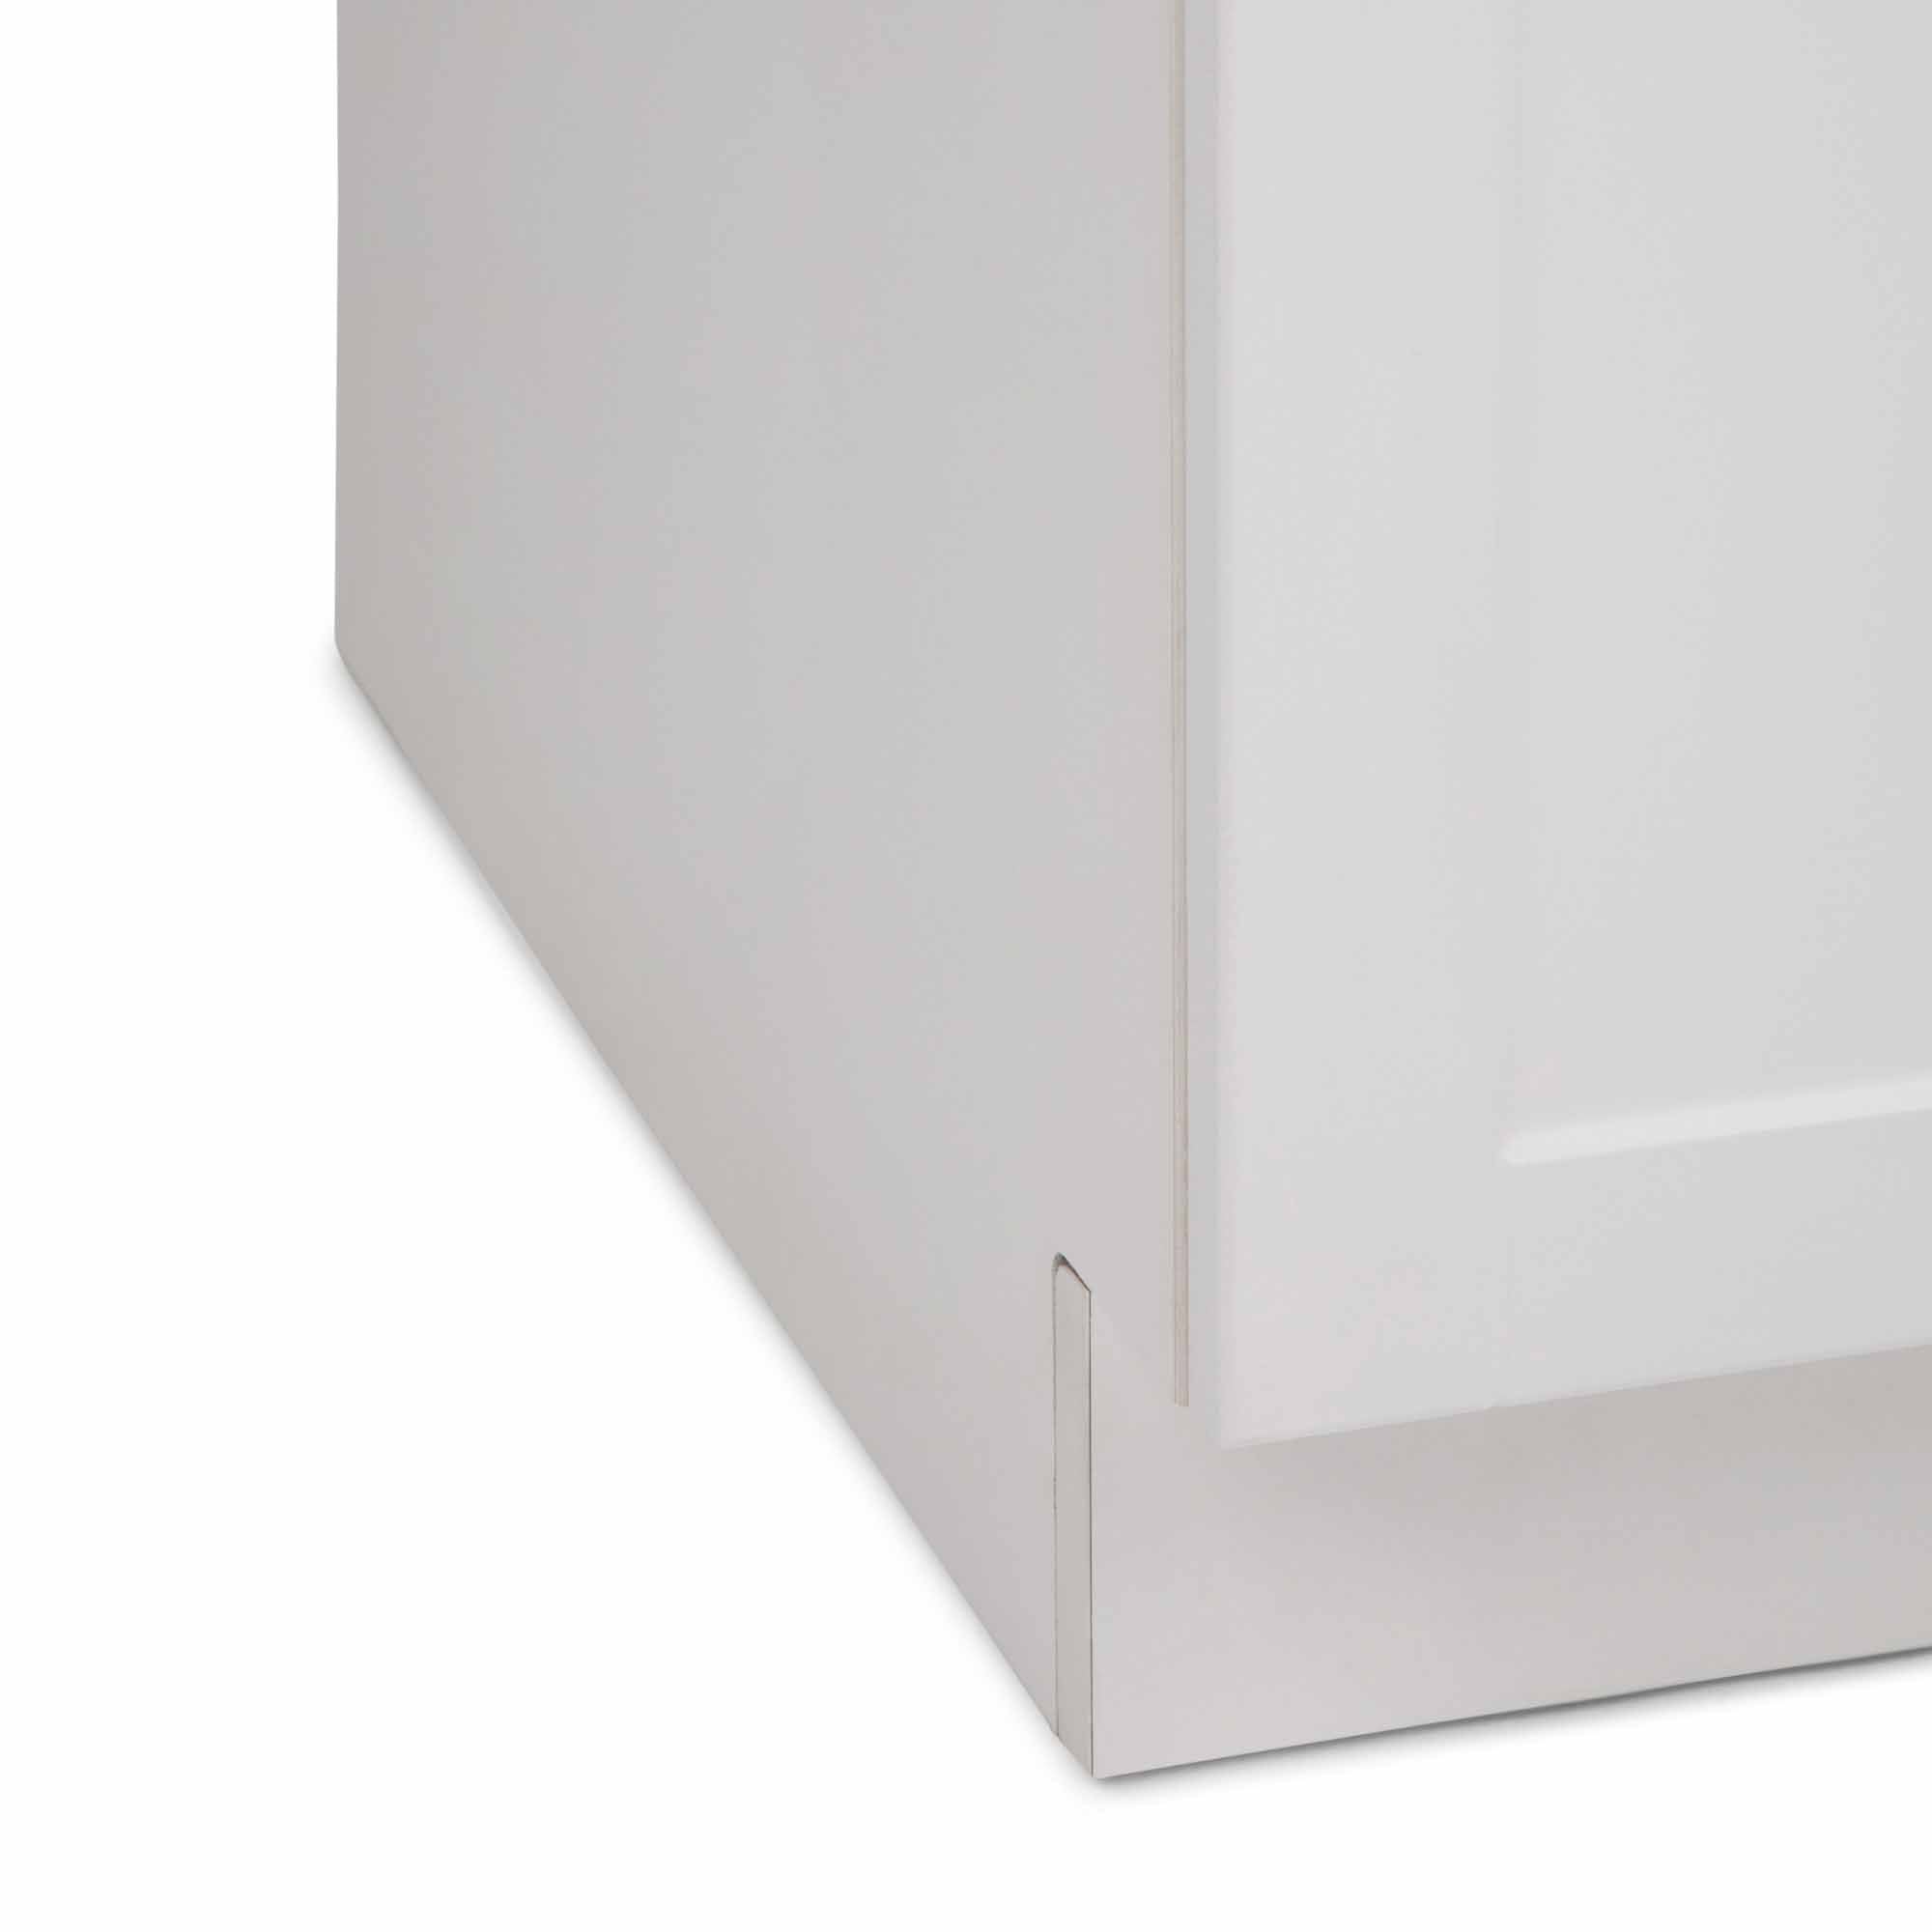 Pure White | Kyle 24 inch Laundry Cabinet with Pull-out Faucet and ABS Sink